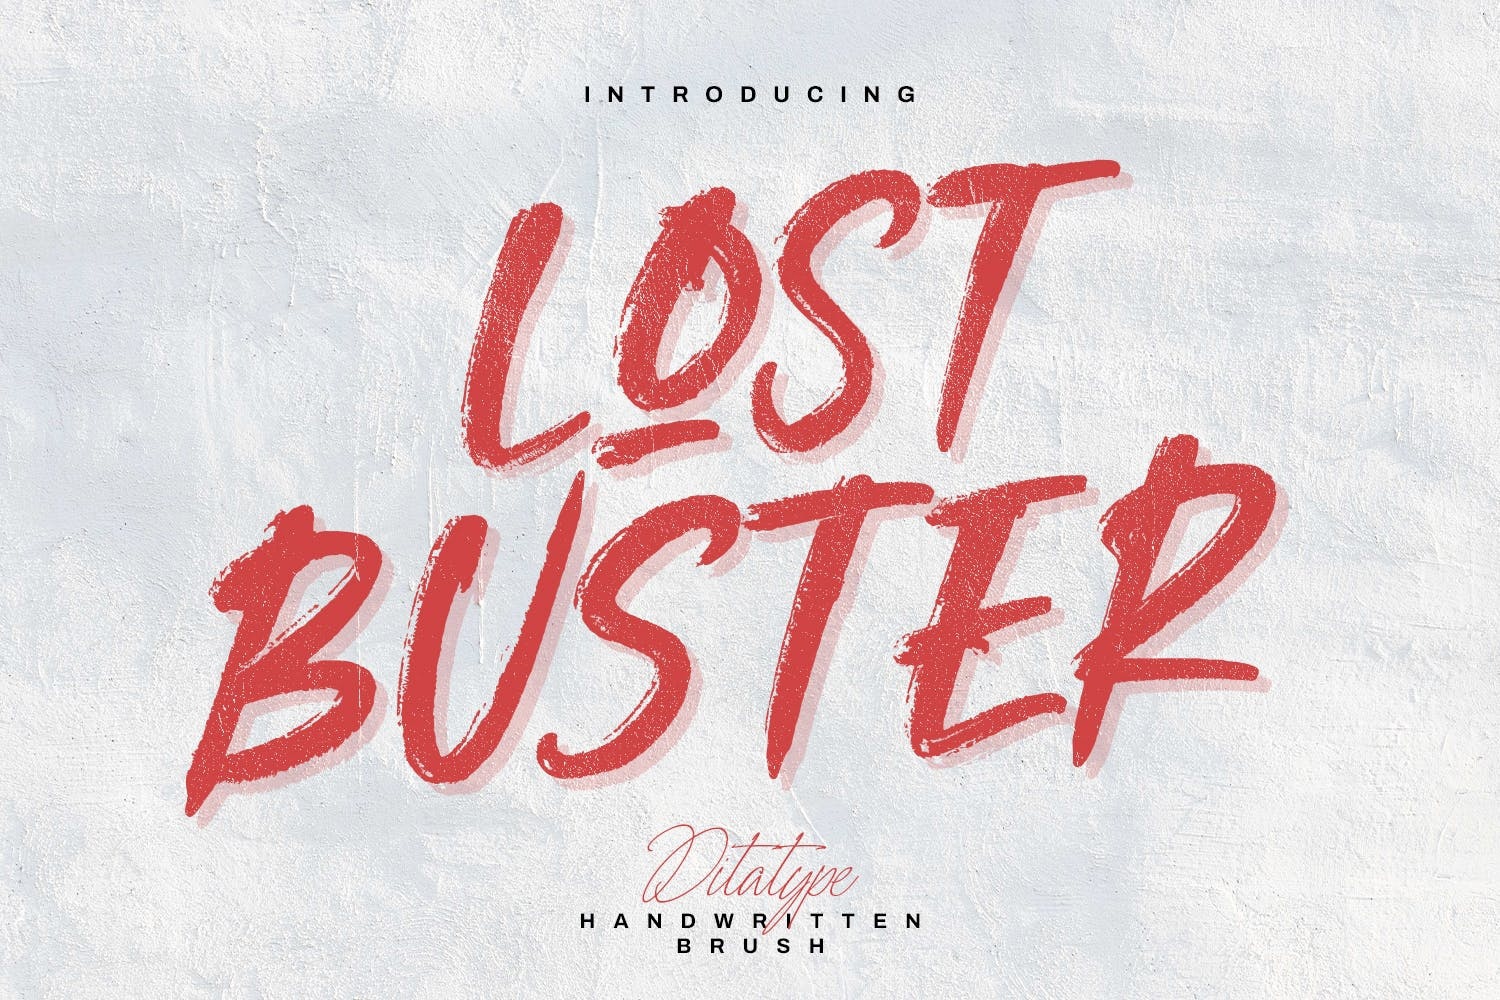 Font Lost Buster